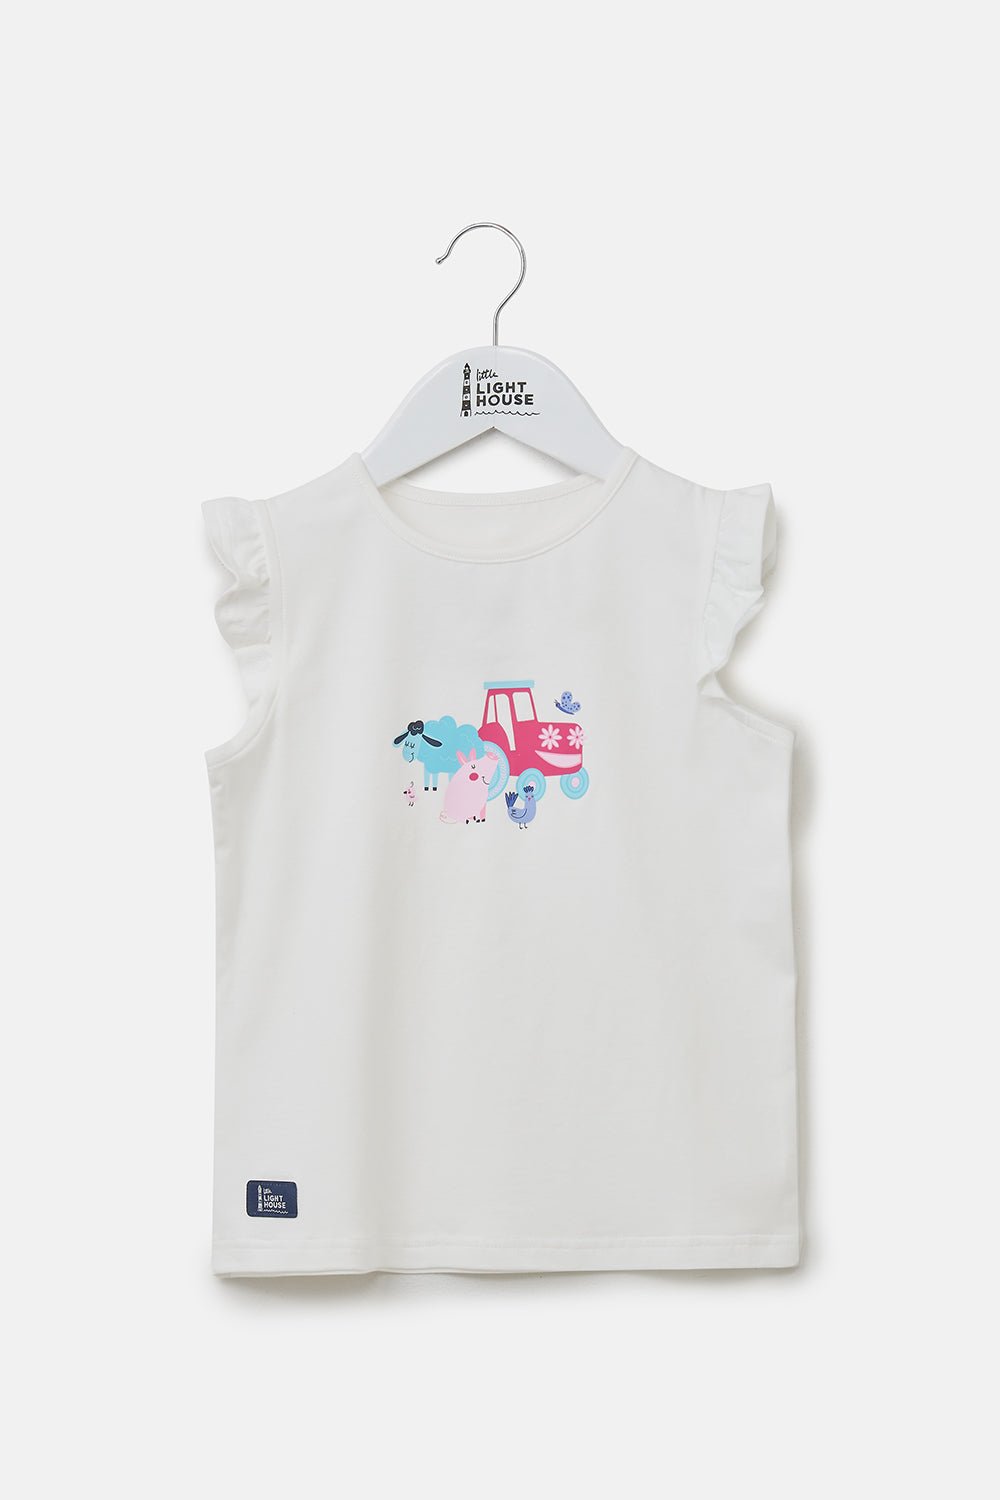 Causeway Swing Tee - Pink Tractor Friends-Lighthouse